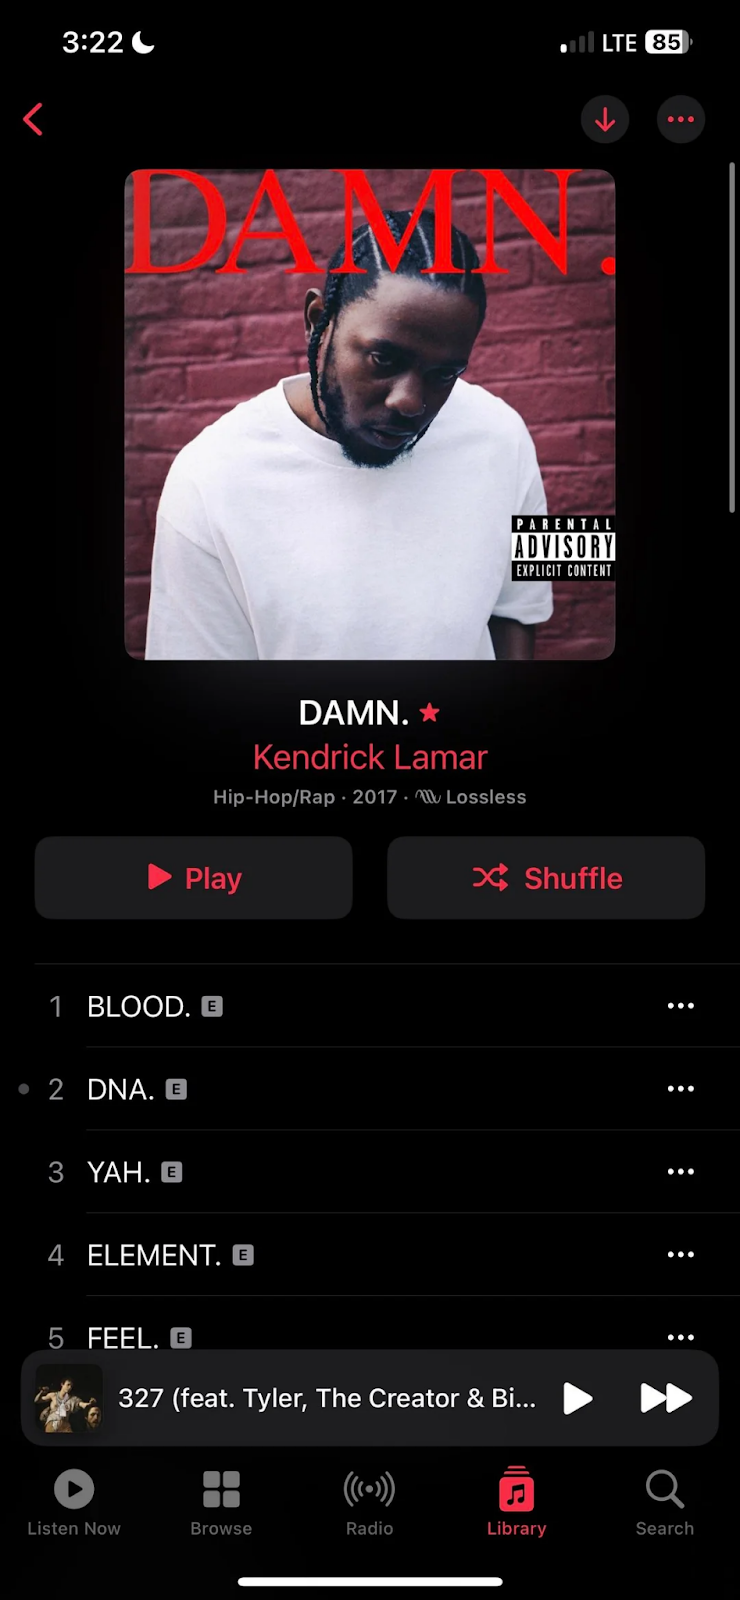 Apple Music screenshot of the DAMN. by Kendrick Lamar album page, there’s a red star icon near the album name